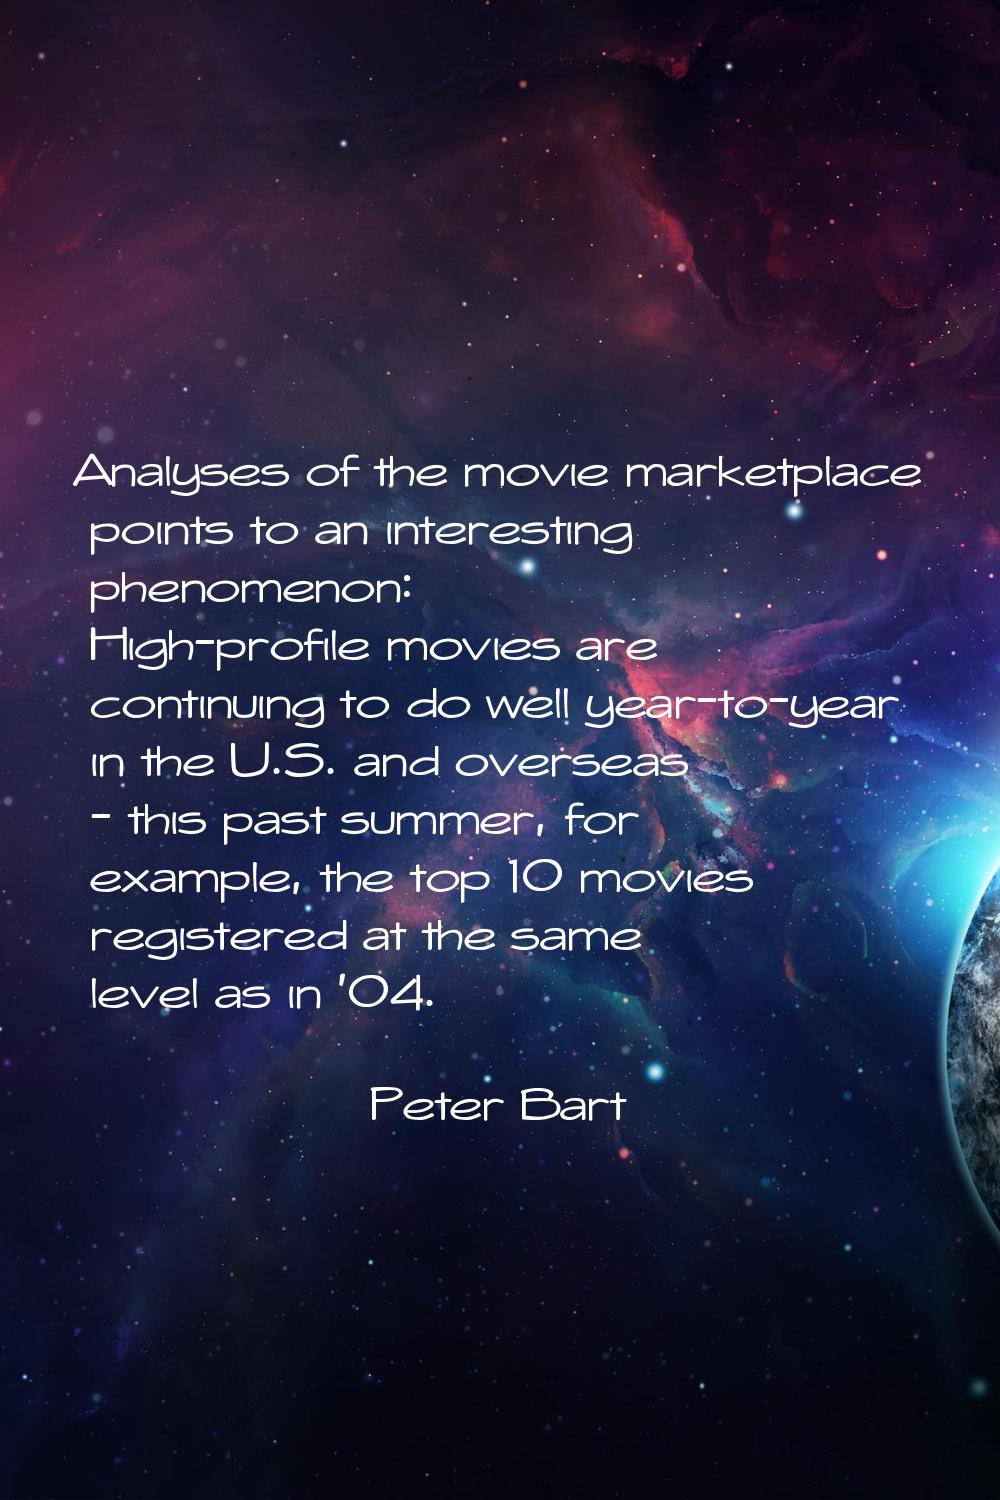 Analyses of the movie marketplace points to an interesting phenomenon: High-profile movies are cont